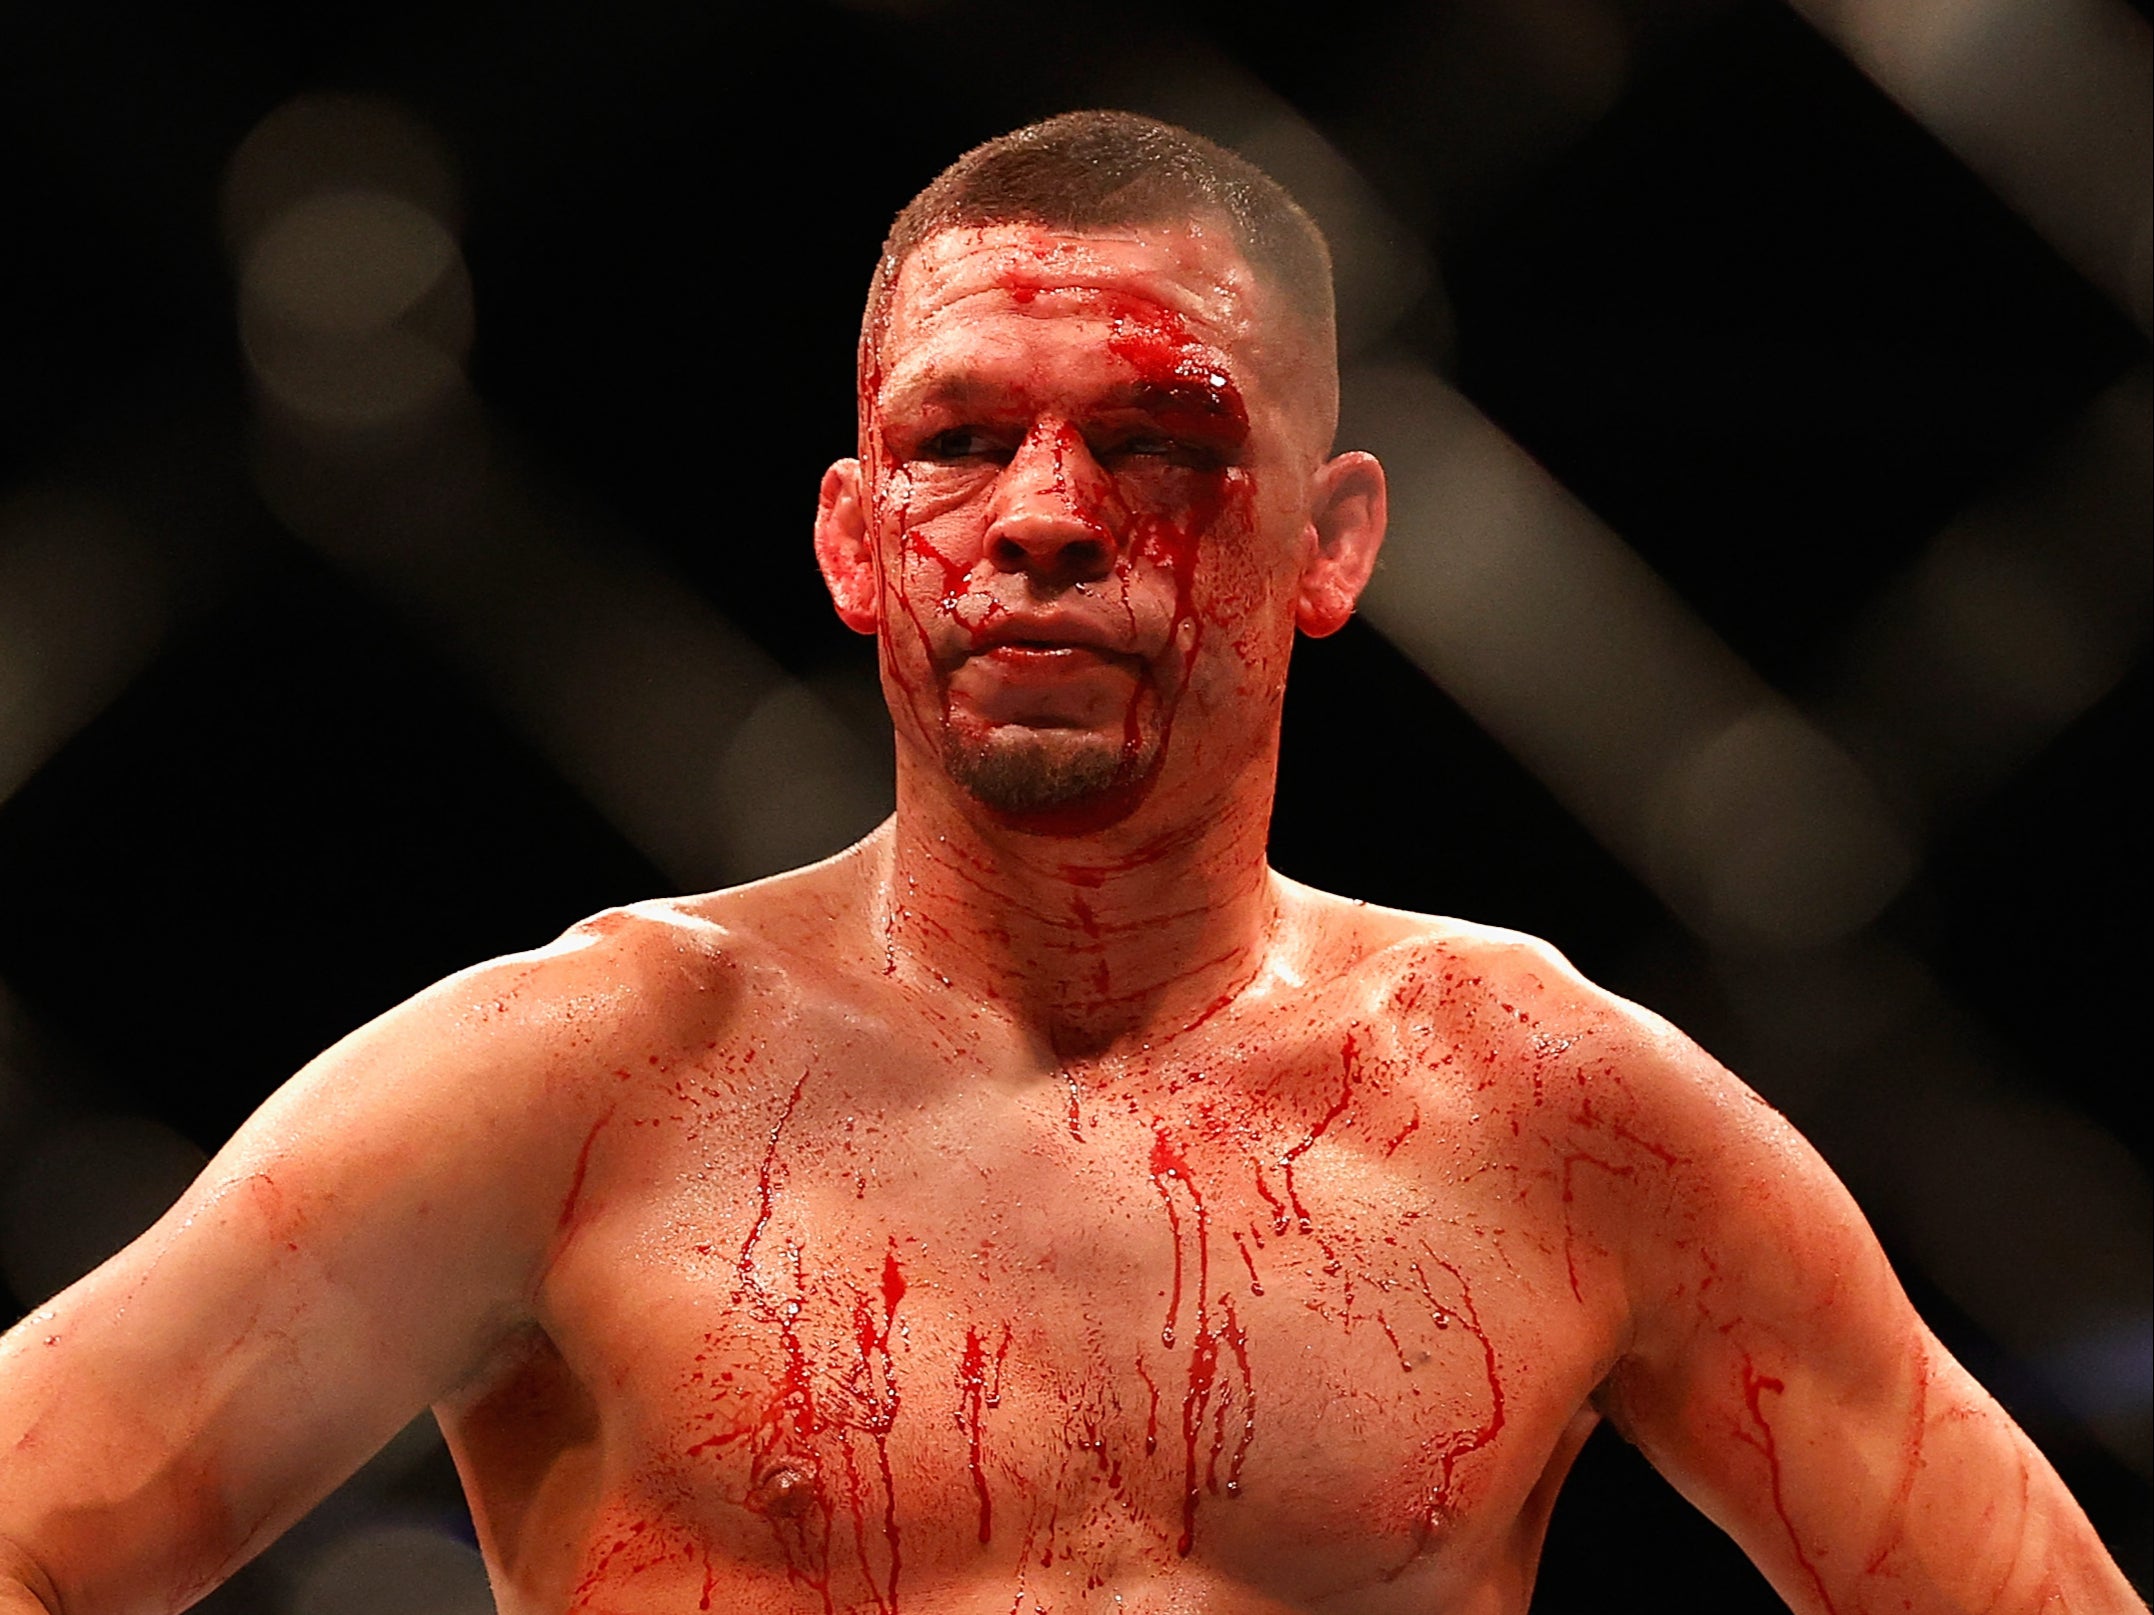 Nate Diaz last fought in June 2021, losing to Leon Edwards via decision